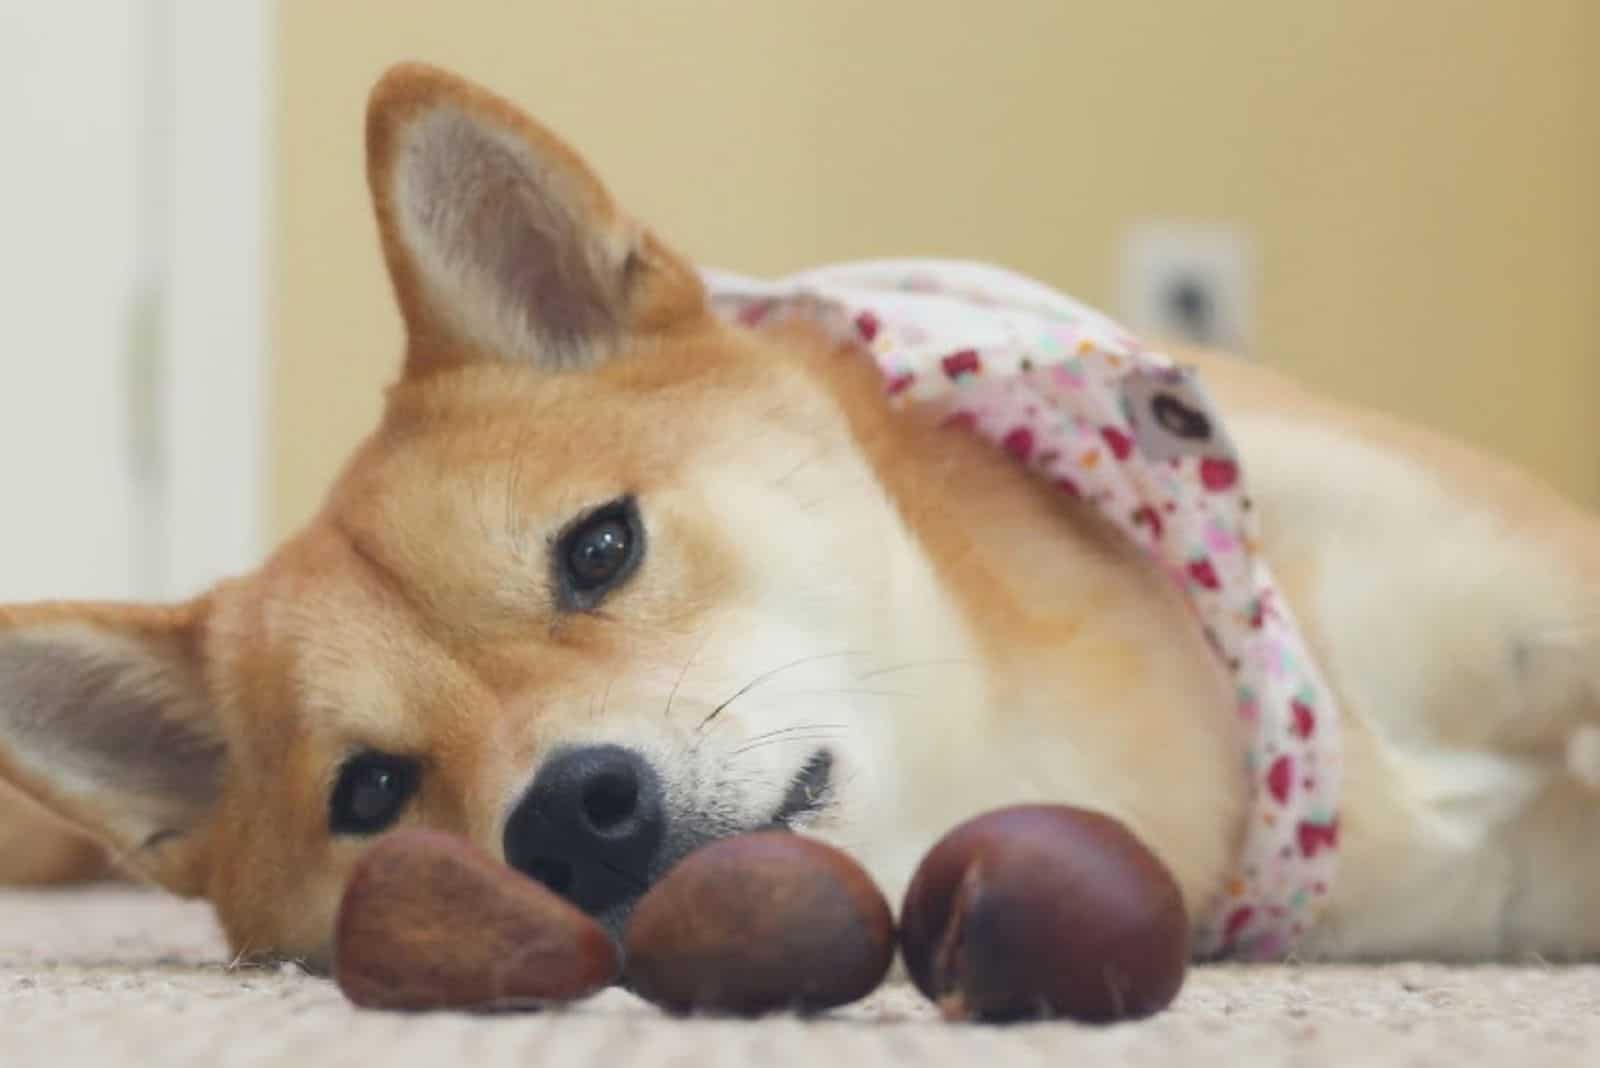 the akita inu lies and looks at the three chestnuts in front of him